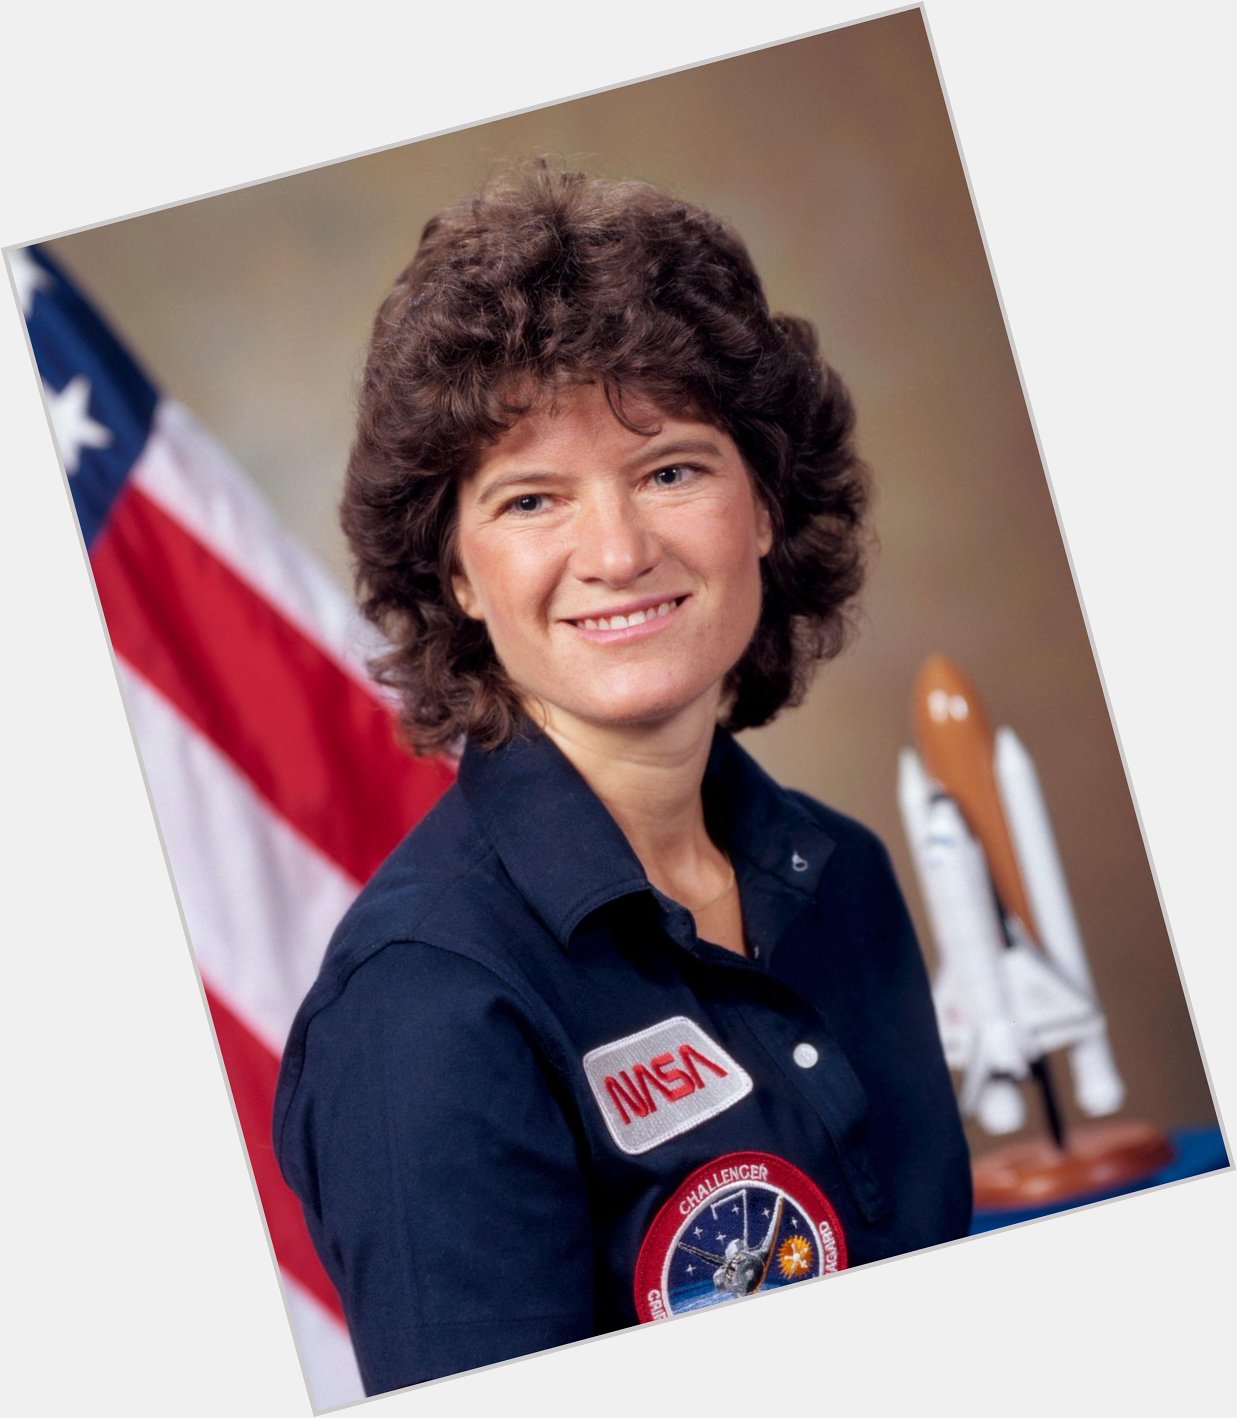 Happy 64th Birthday to Sally Ride! An inspiration and role model to many.   